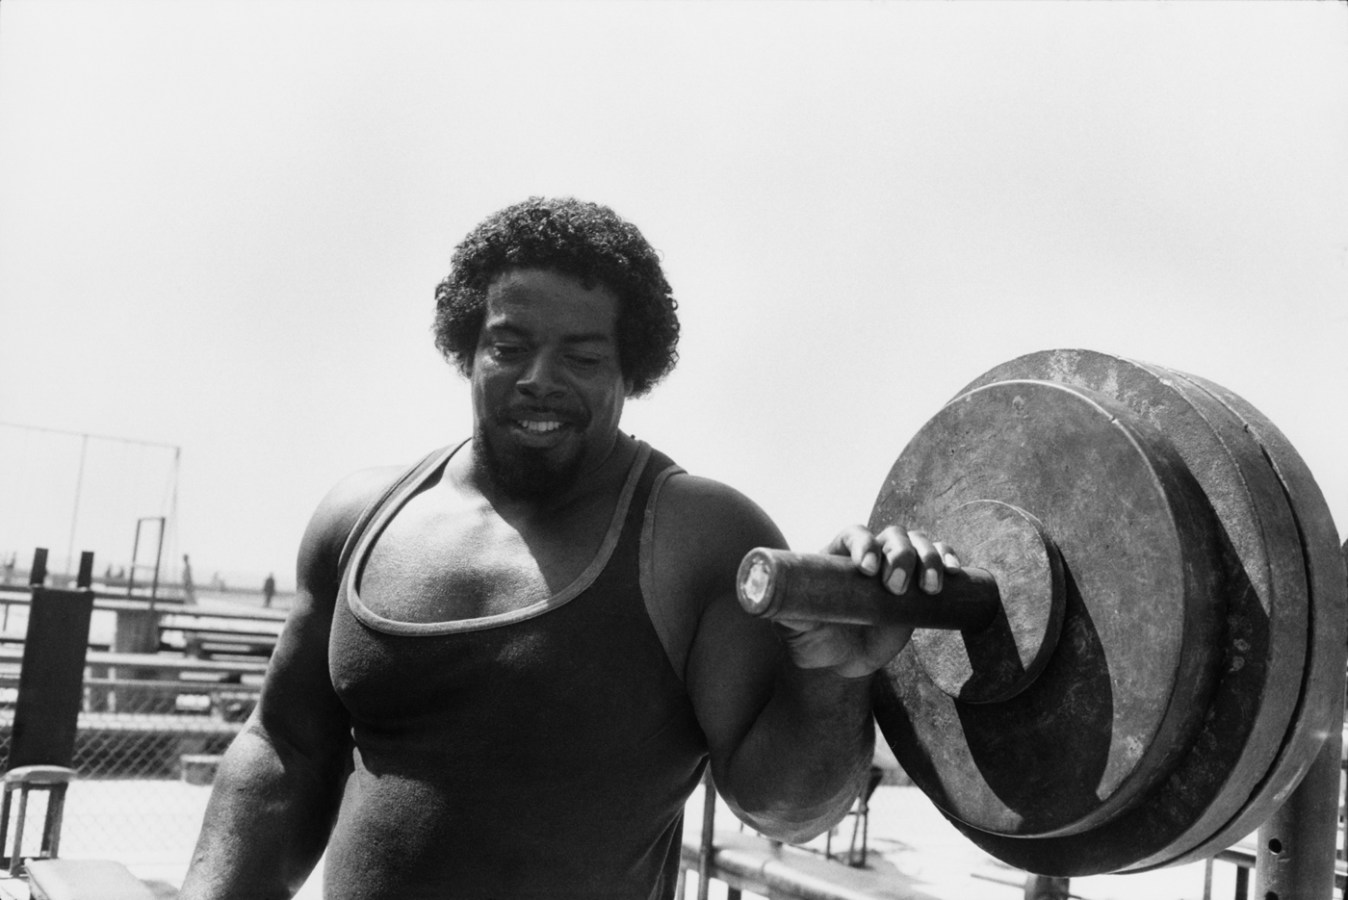 Black-and-white photograph of a muscular man in a tank top next to a large barbell weight